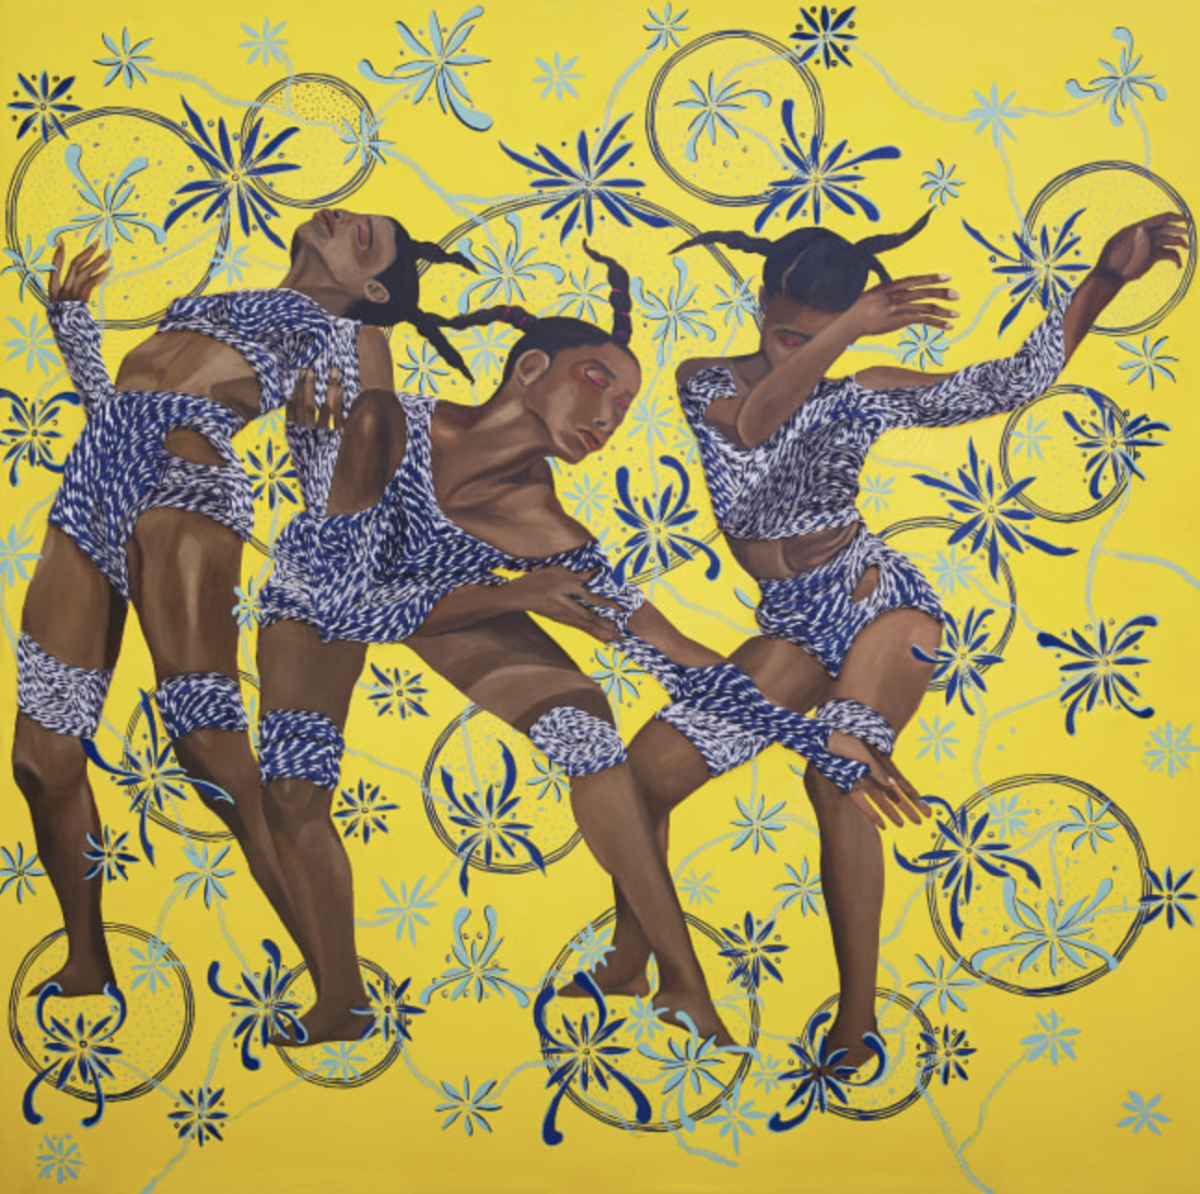 This Week in African Art and Culture (July 31 – August 6, 2022)